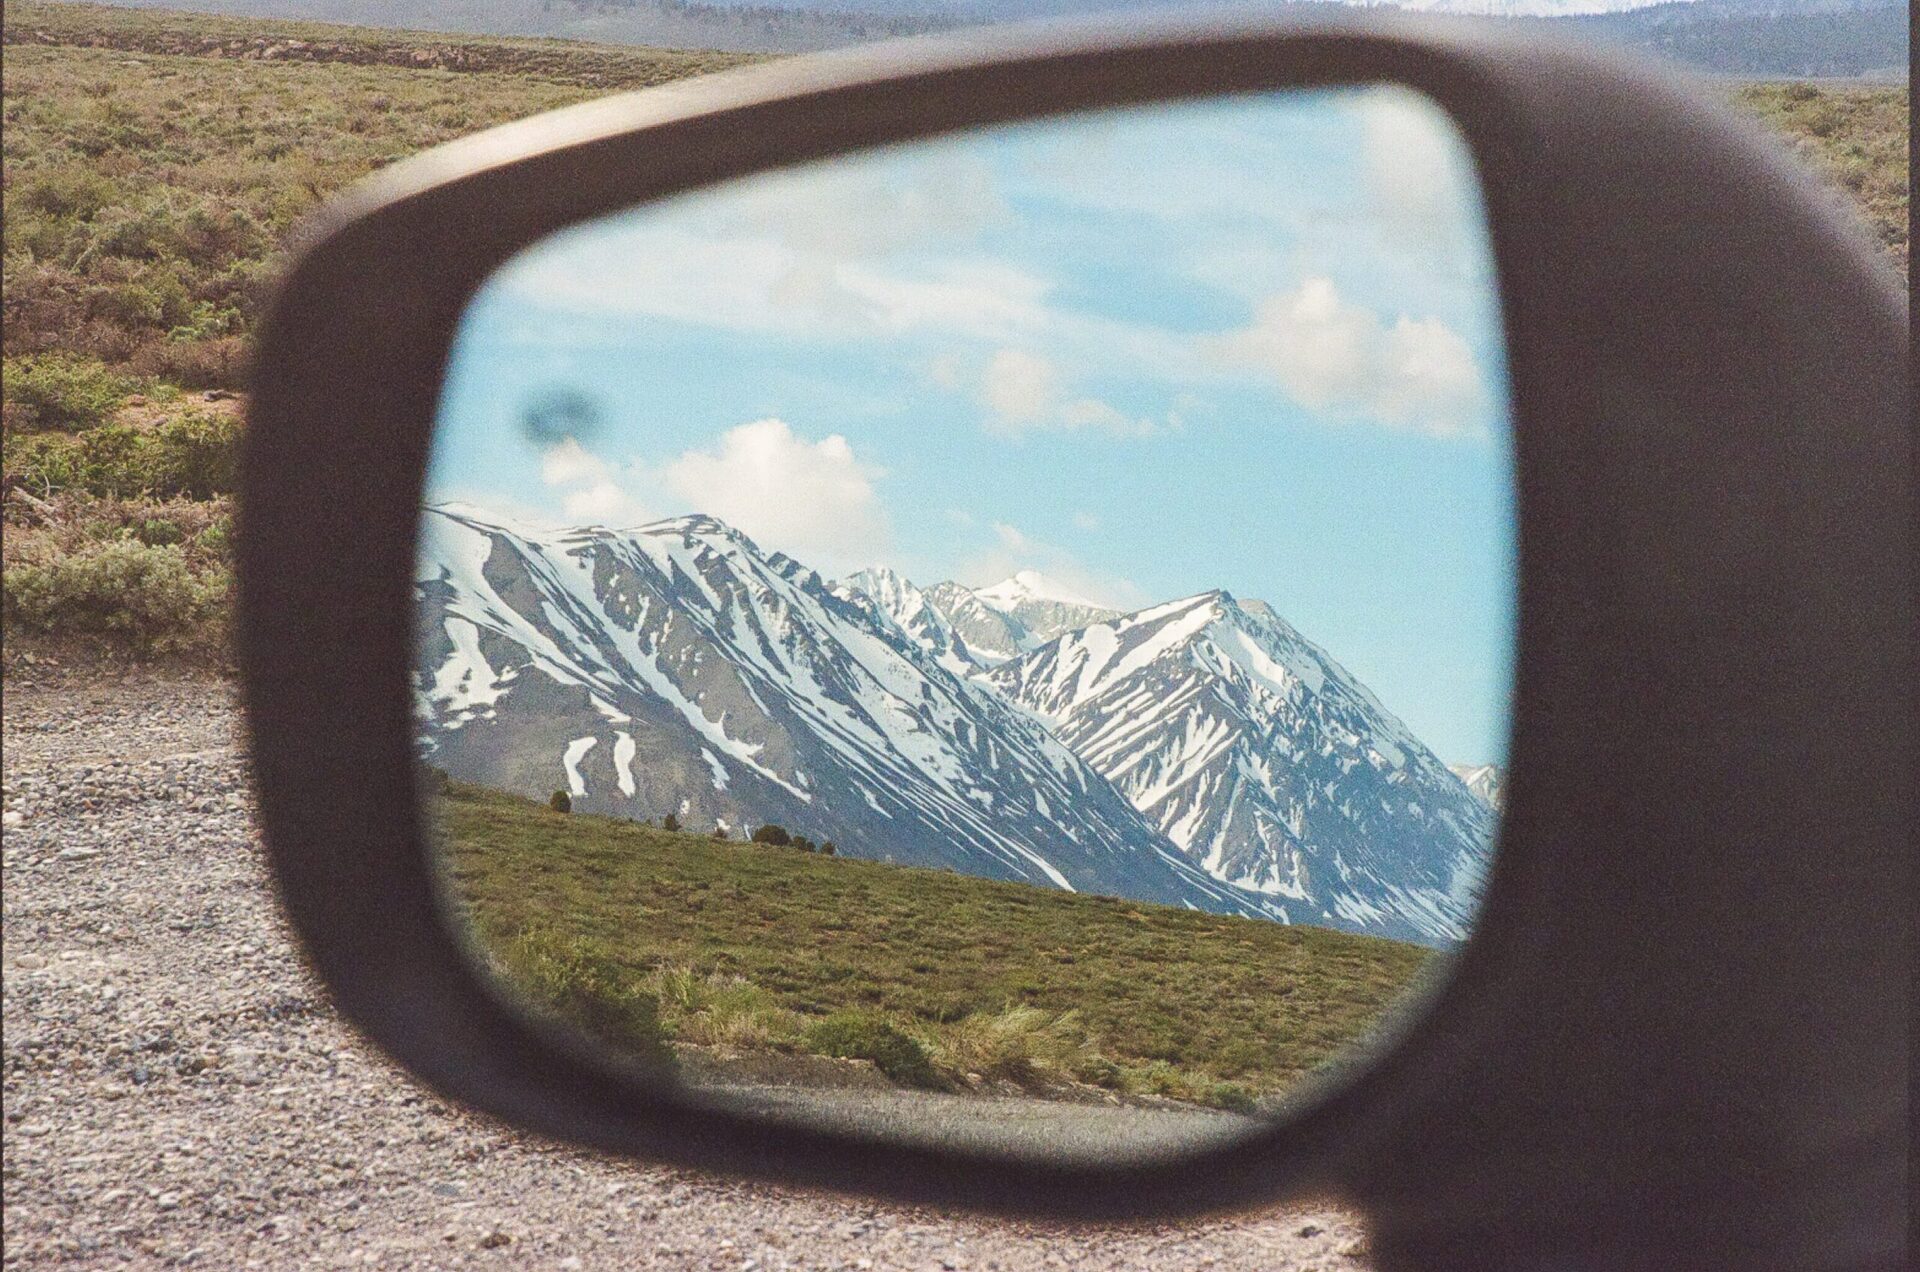 The car's side mirror reveals a spectacular snowy mountain view, creating an enchanting scene.